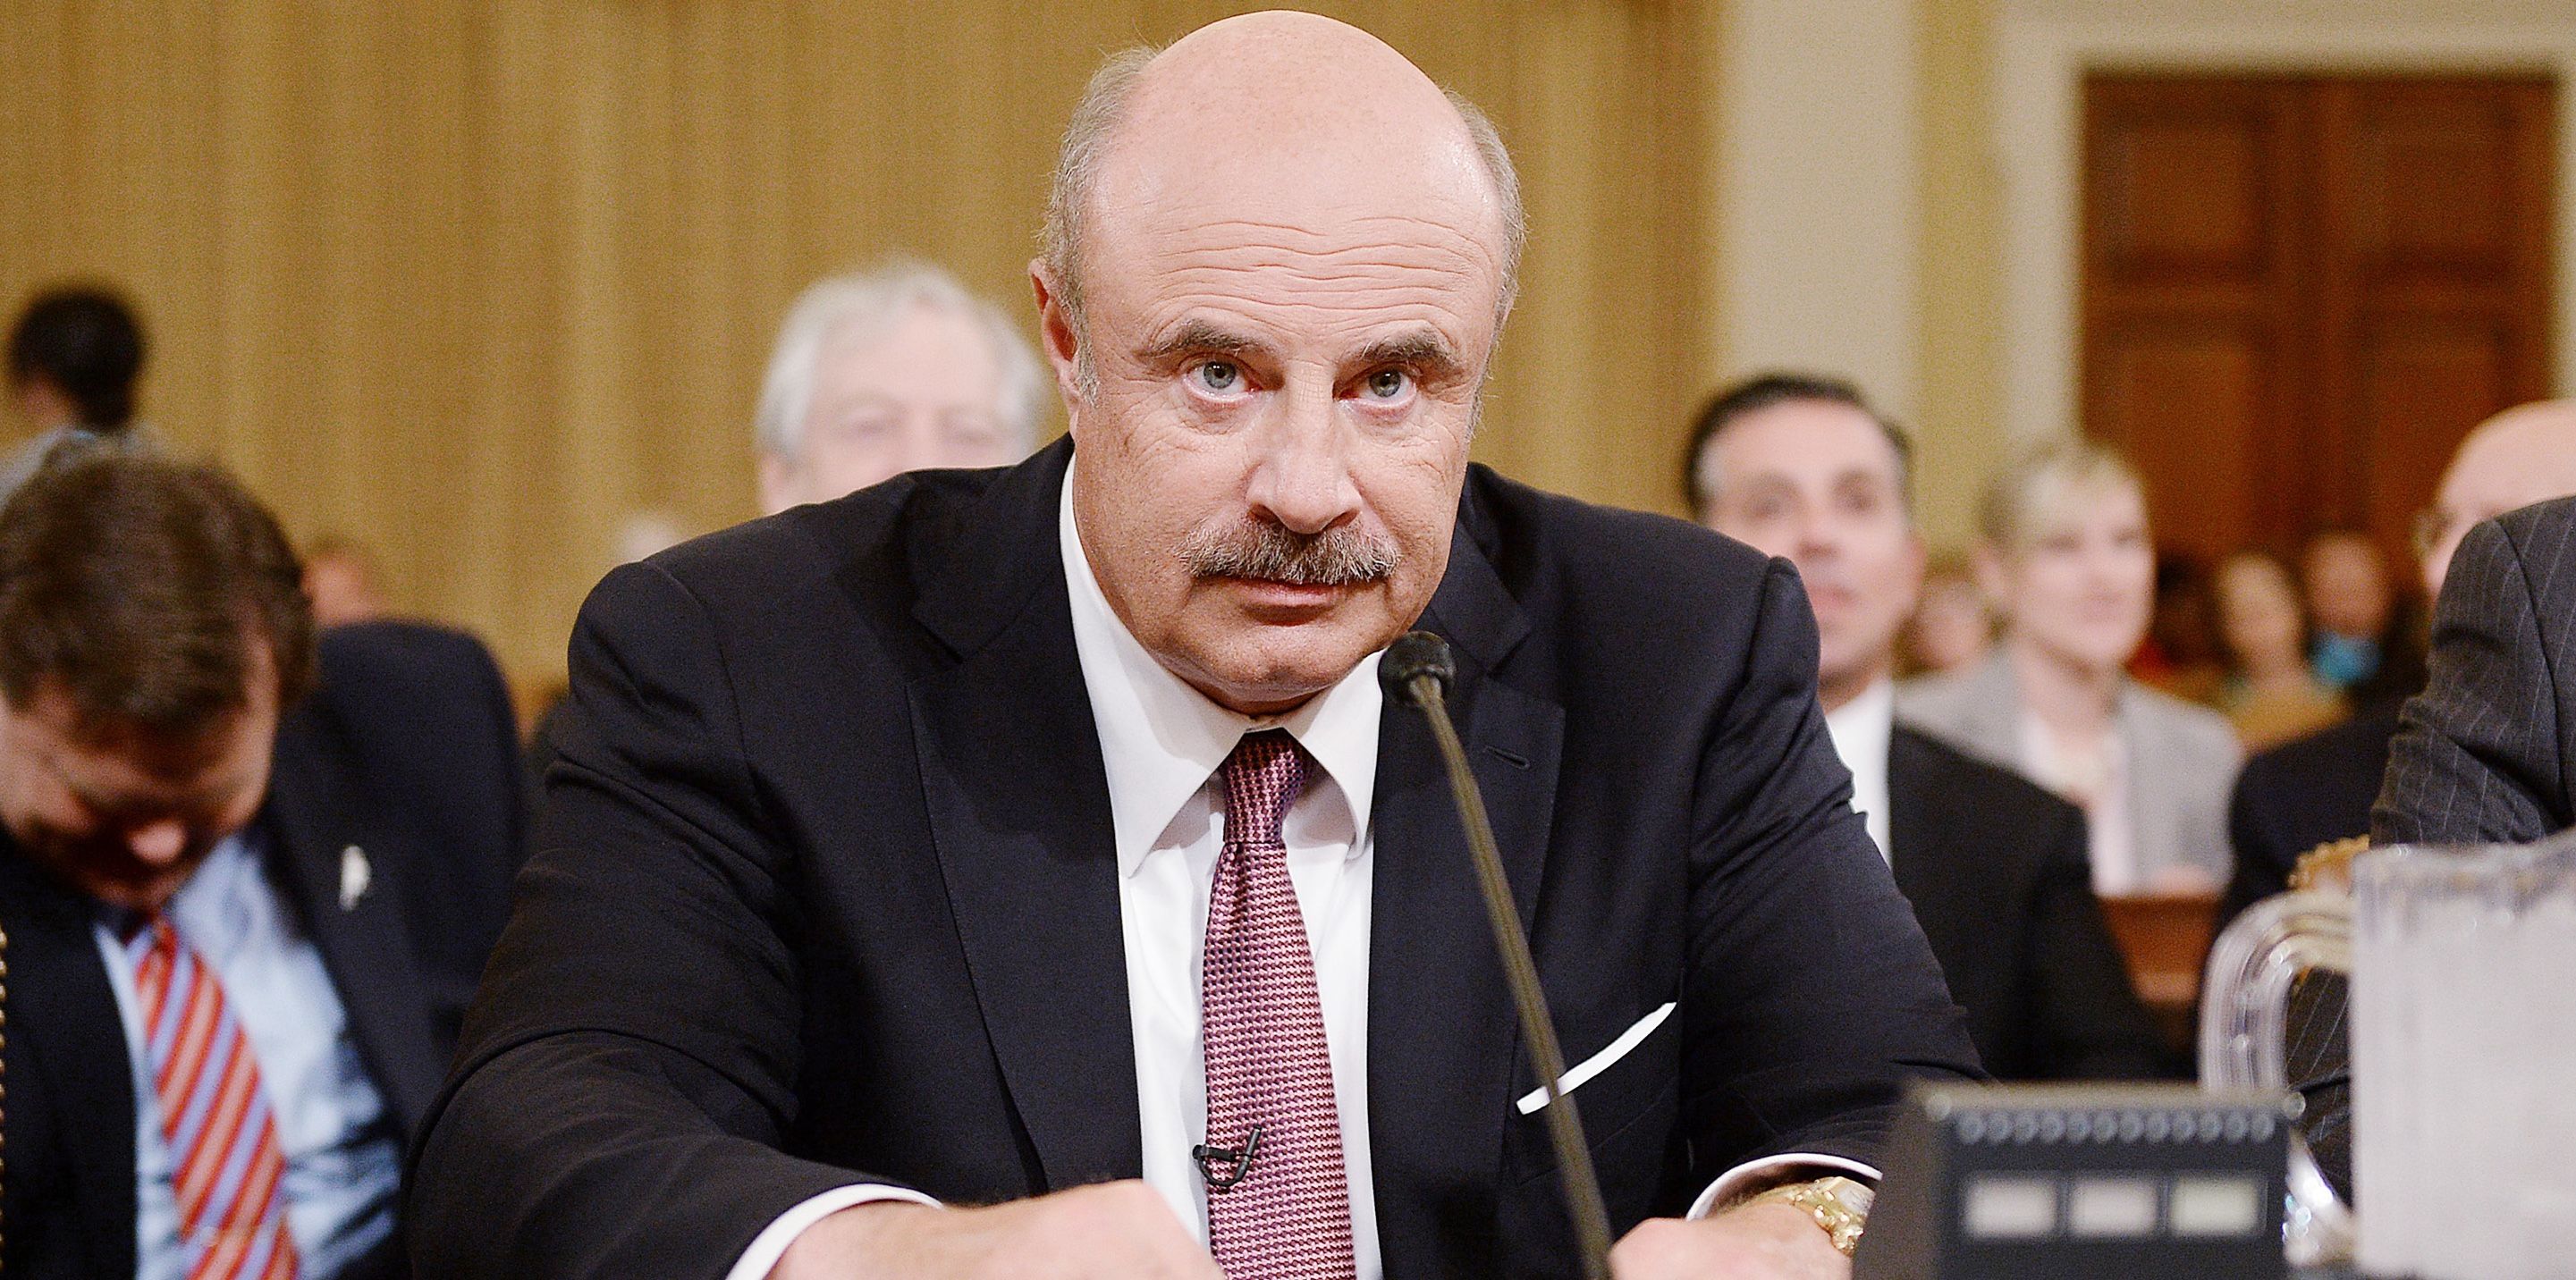 Dr. Phil Has Been Sued Multiple Times By His Guests For Mistreatment